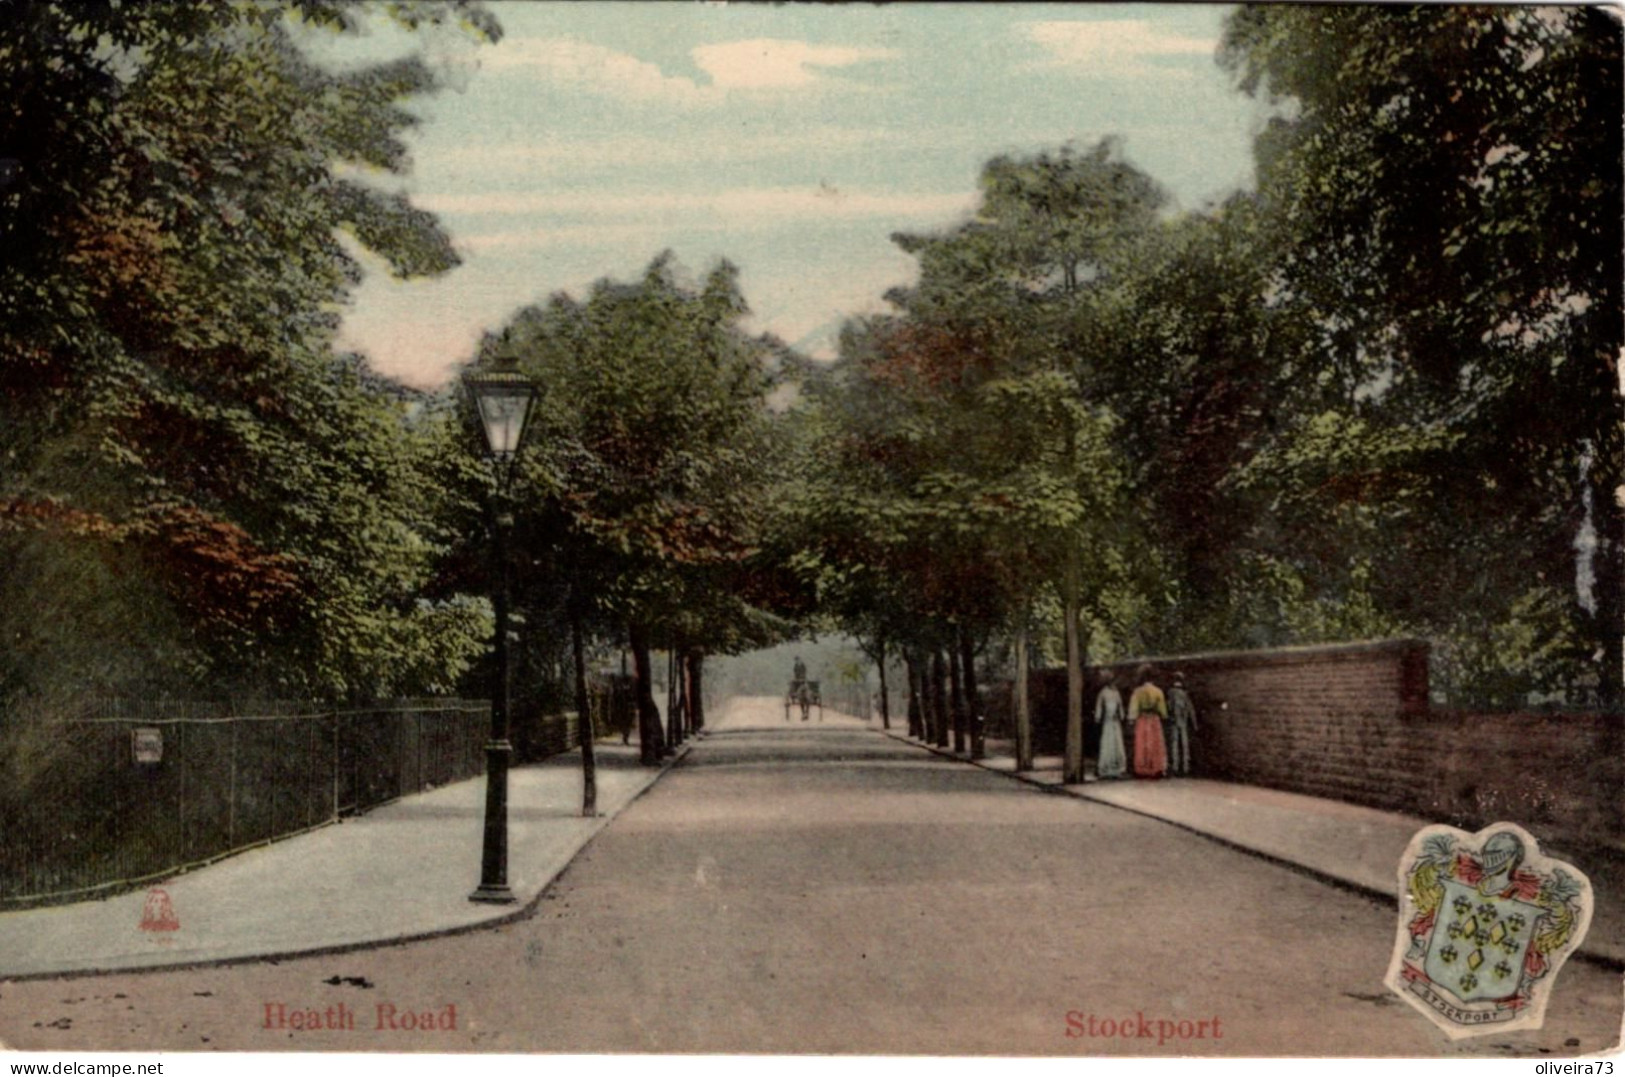 HEATH ROAD - STOckPORT - Middlesex